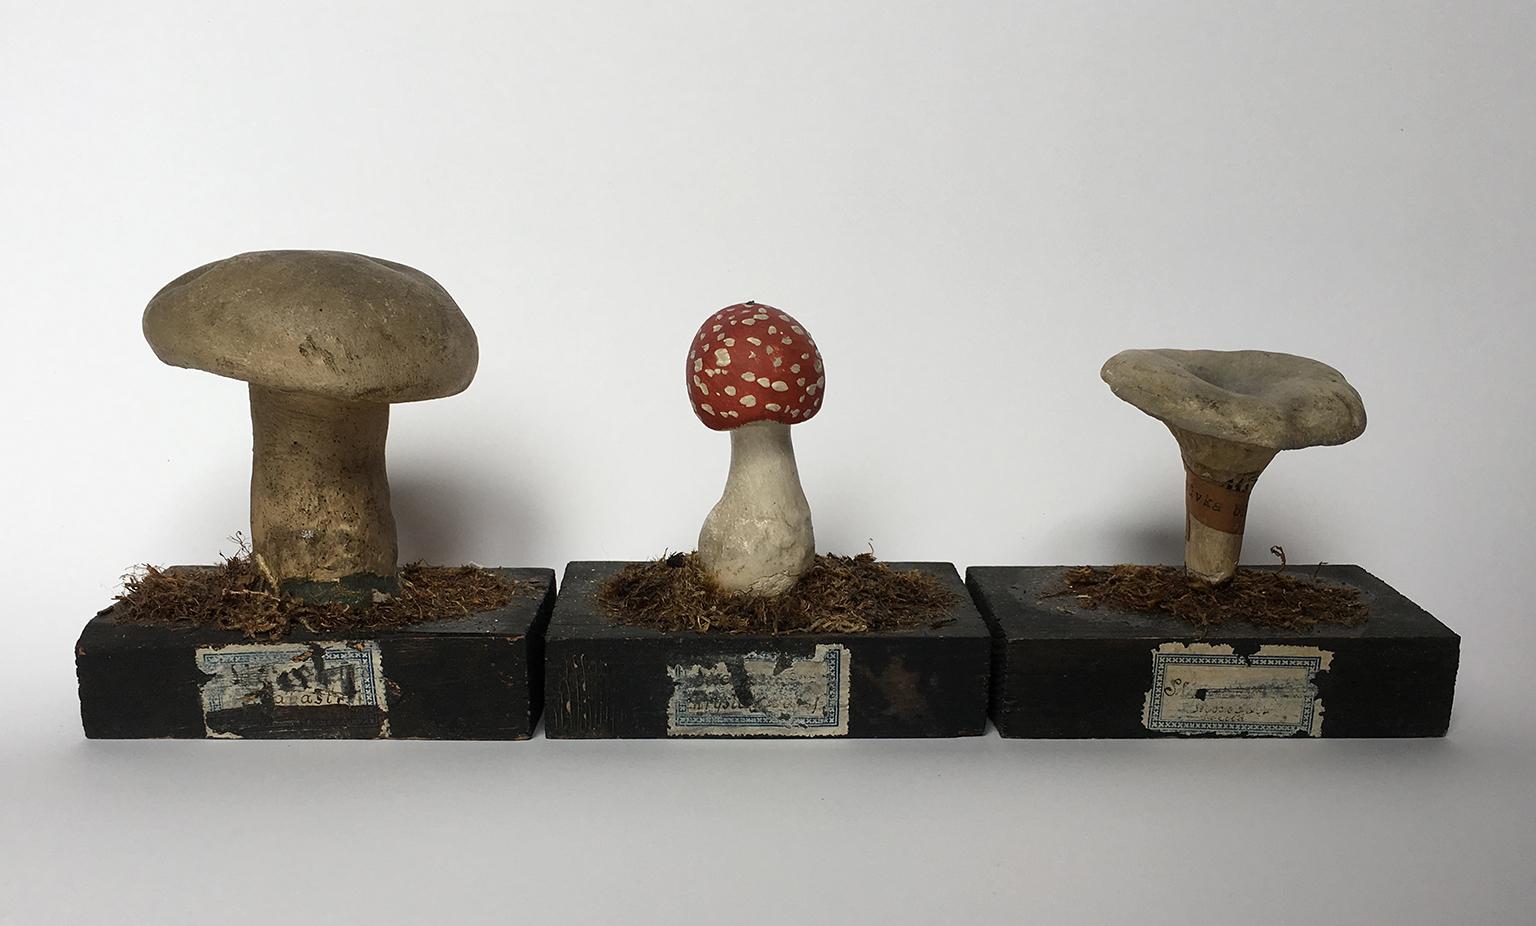 Carved 20th Century Wood and Painted Plaster Czech Mushroom Botanical Models circa 1920